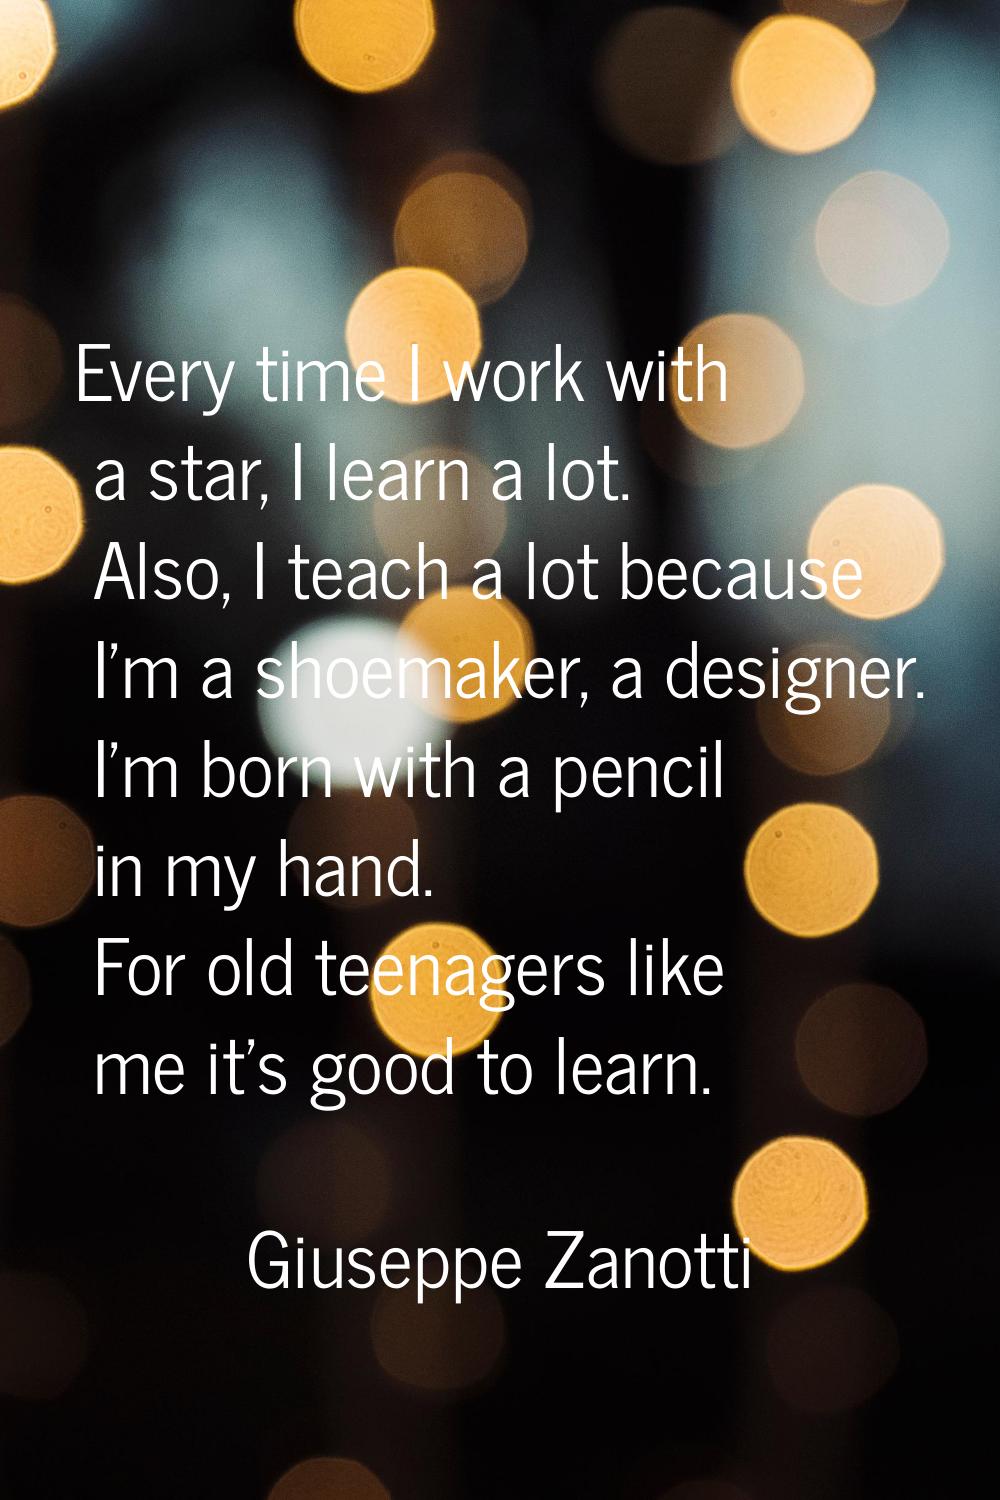 Every time I work with a star, I learn a lot. Also, I teach a lot because I'm a shoemaker, a design